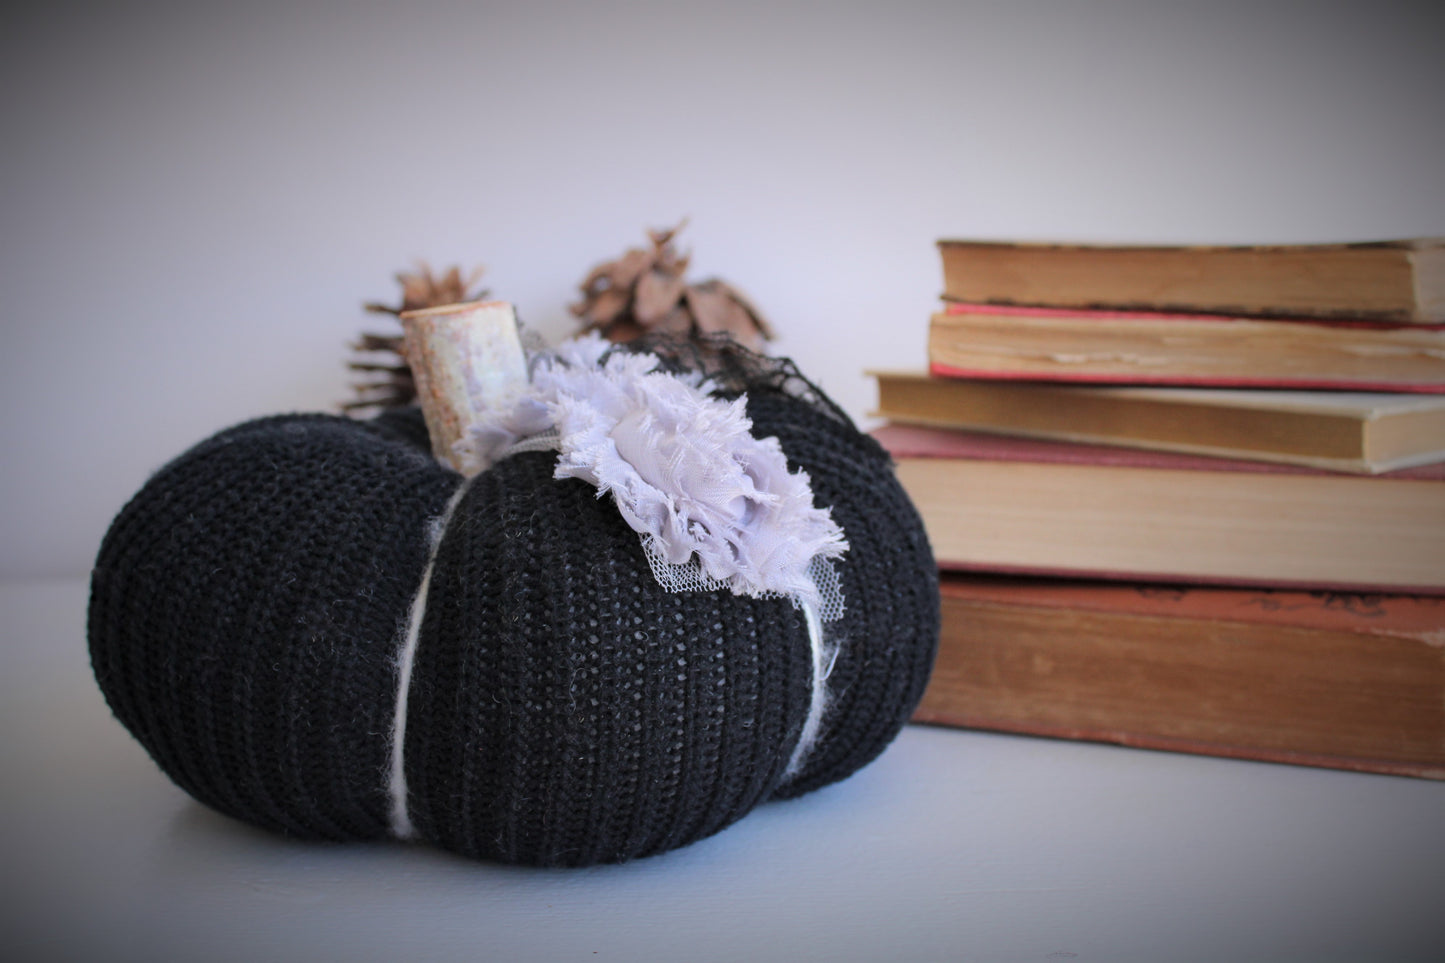 Pumpkin Pillow in Black, Embellished with Gray Roses, Black Lace and Wooden Stem